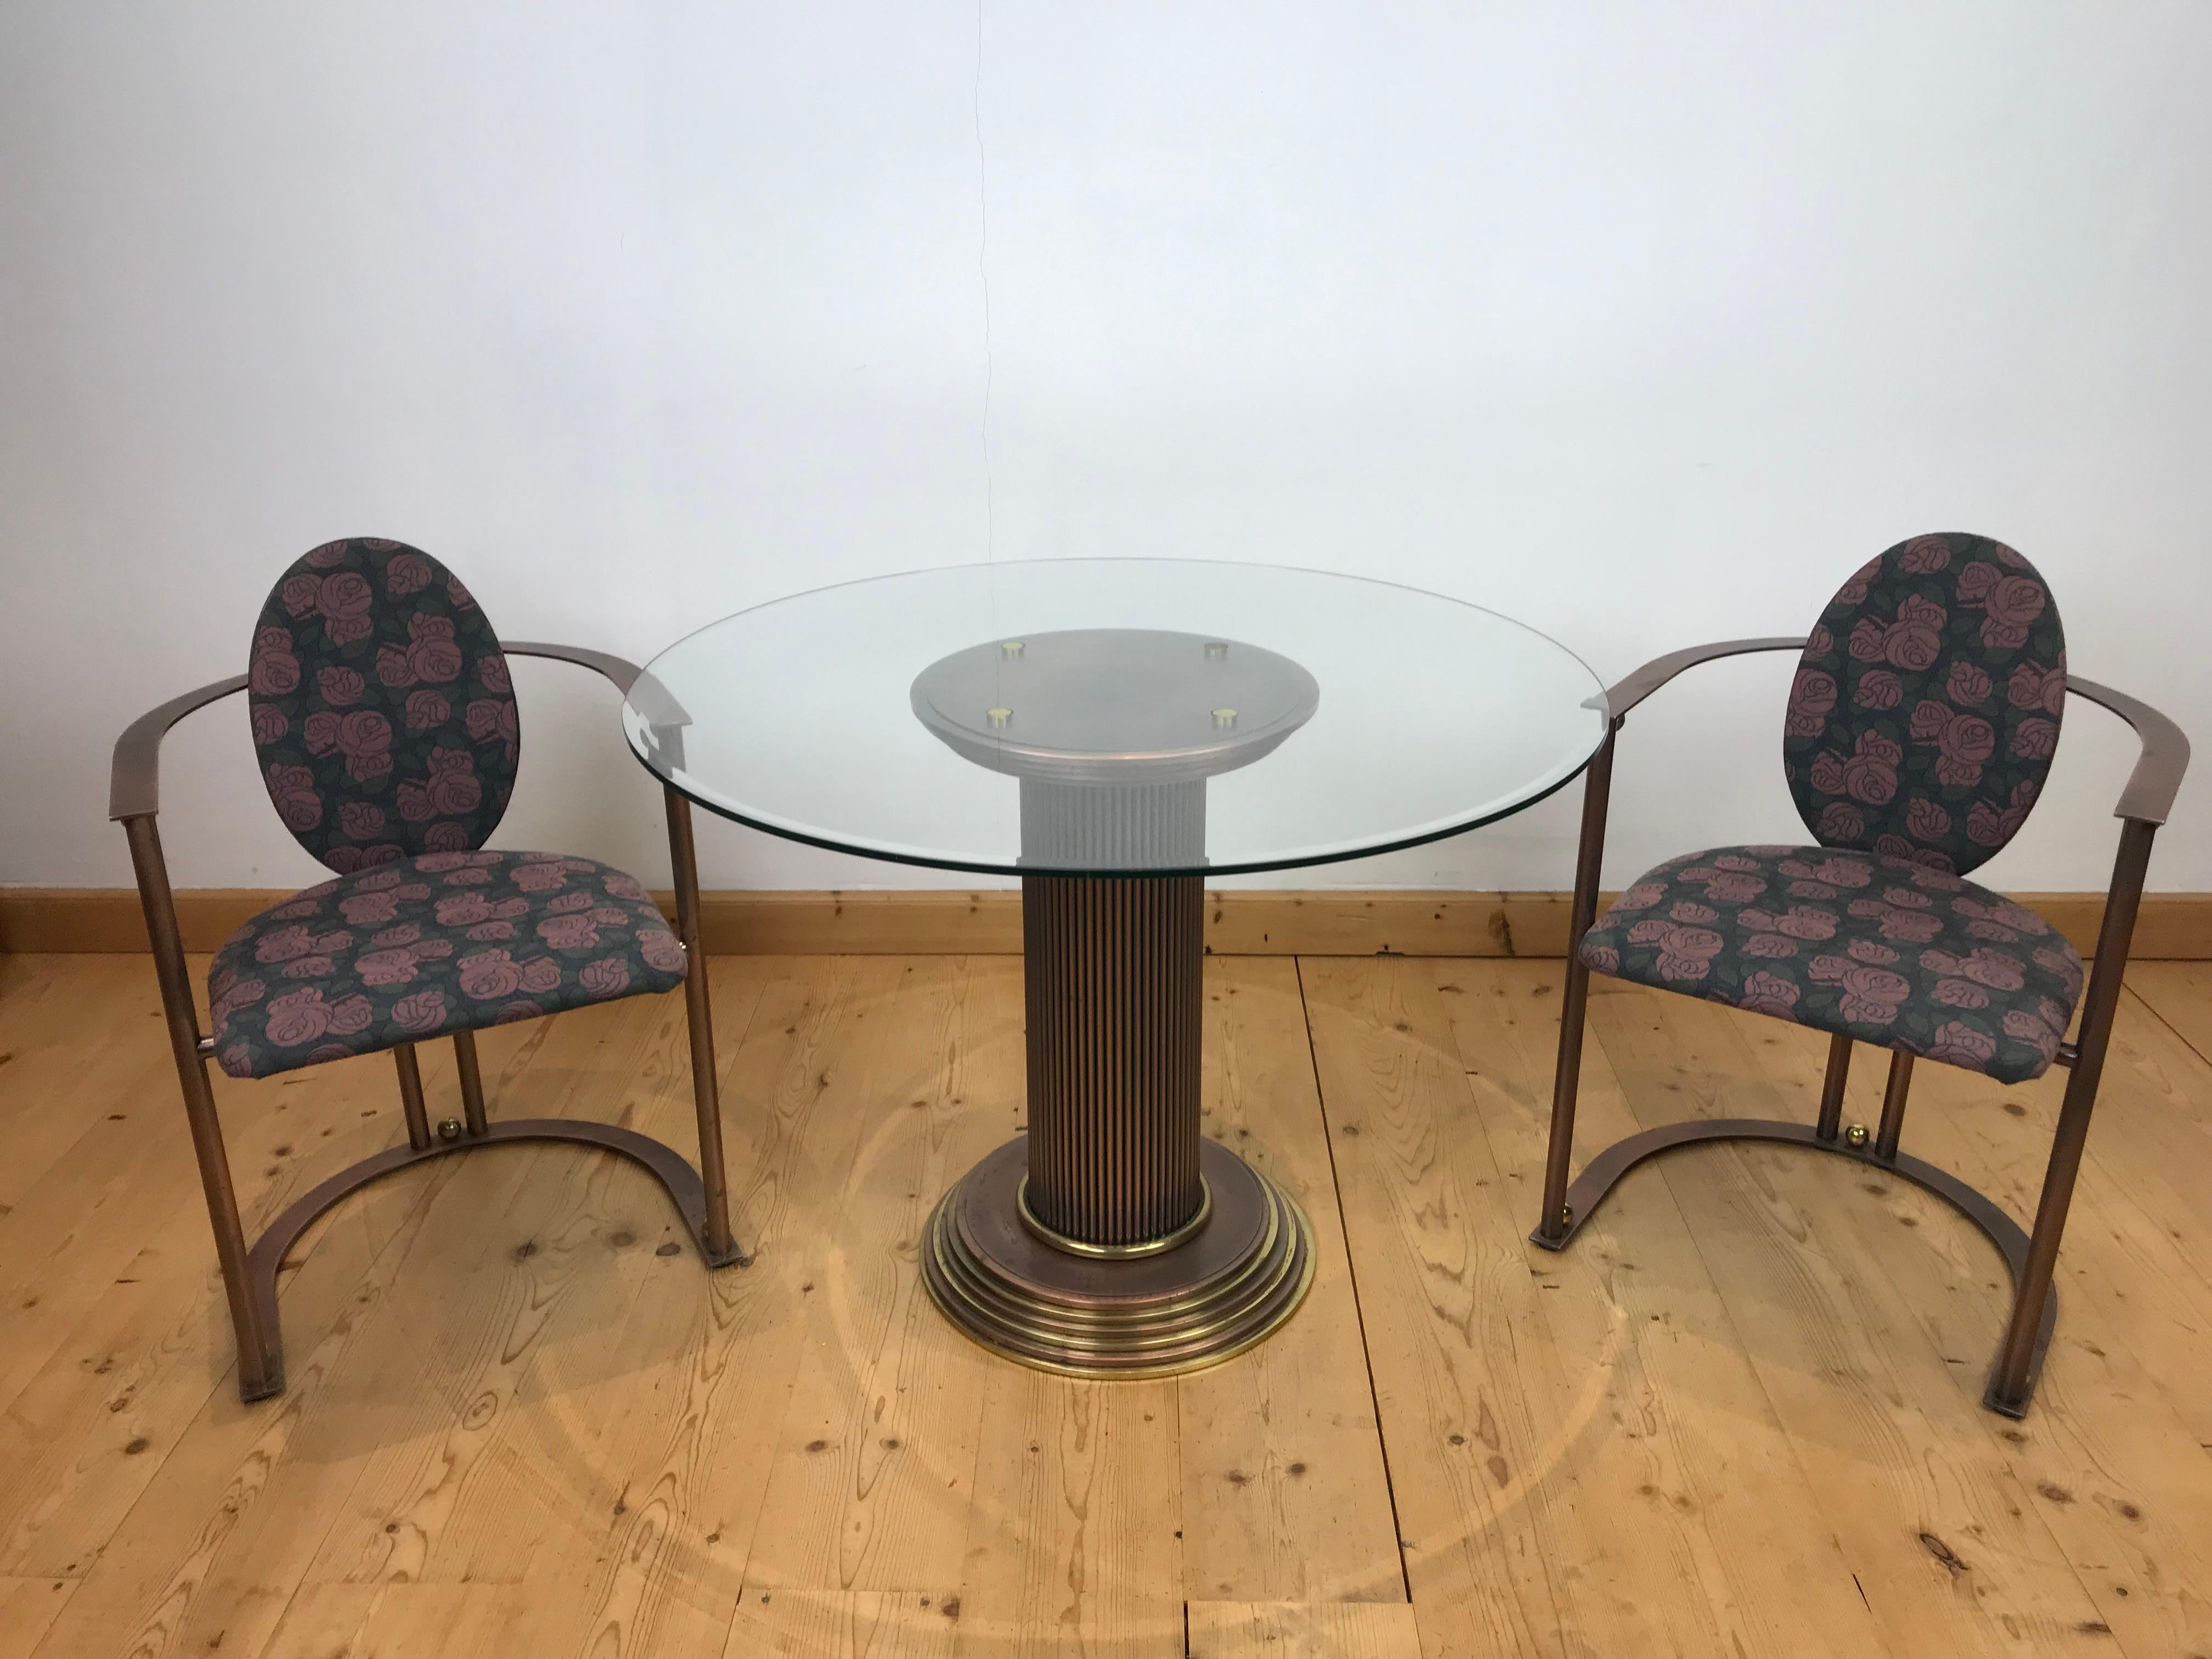 Belgo chrome set consisting a table with 2 chairs - 2 armchairs
Belgo Chrome is a Belgian brand which was known for high quality handmade luxurious furniture like cabinets, tables, chairs, showcases, mirrors, lighting etc mainly made from metal.